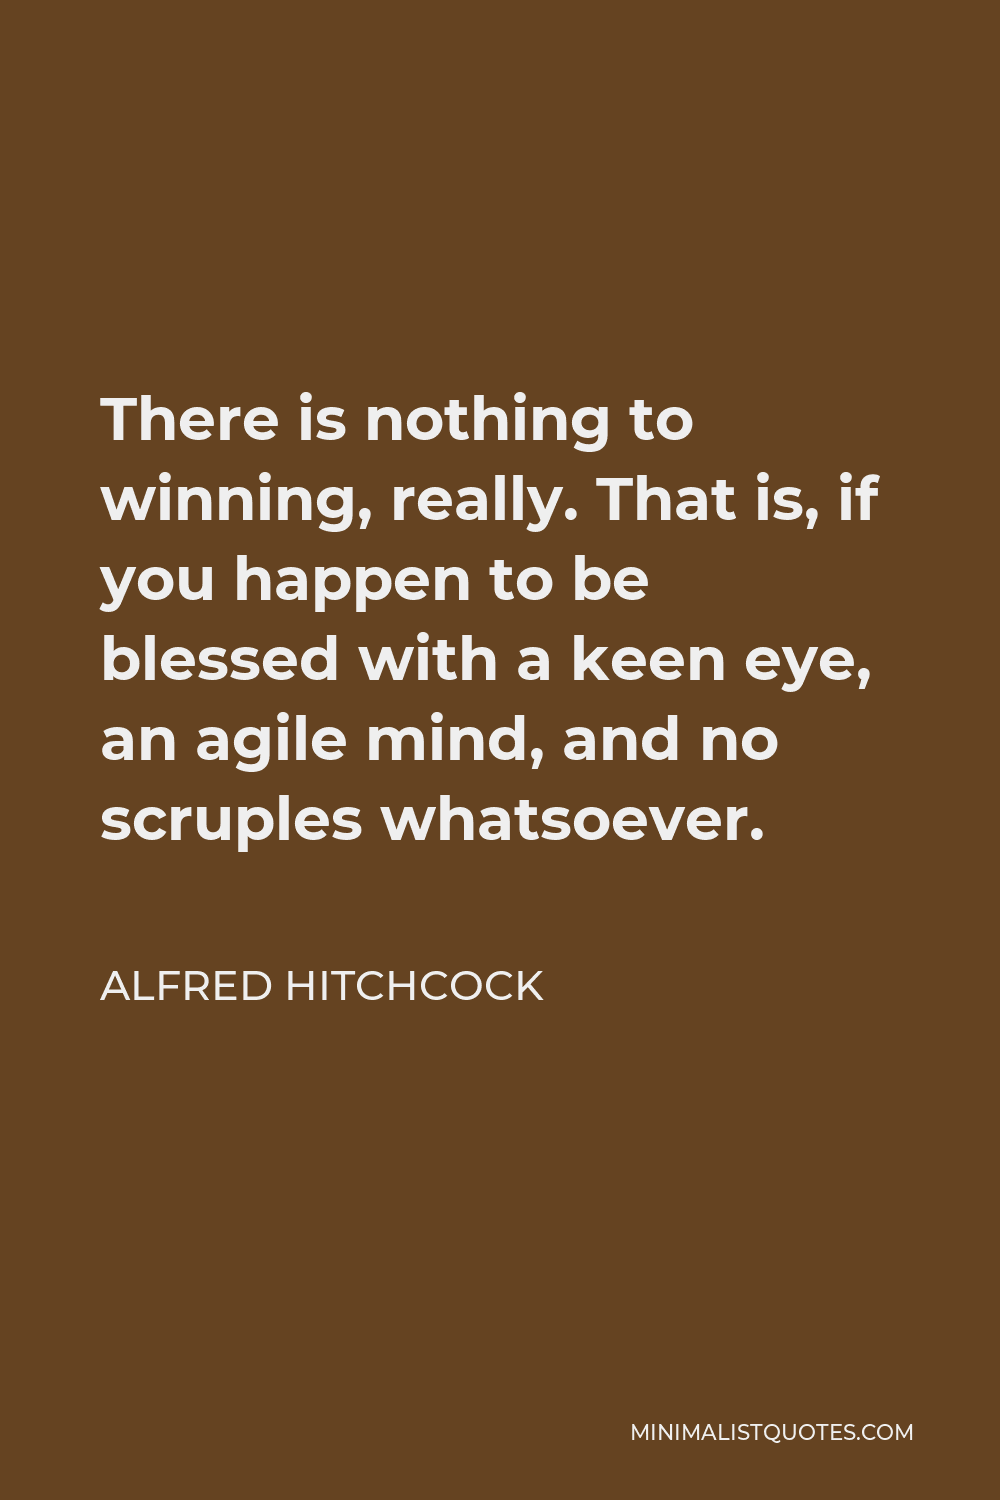 Alfred Hitchcock Quote - There is nothing to winning, really. That is, if you happen to be blessed with a keen eye, an agile mind, and no scruples whatsoever.